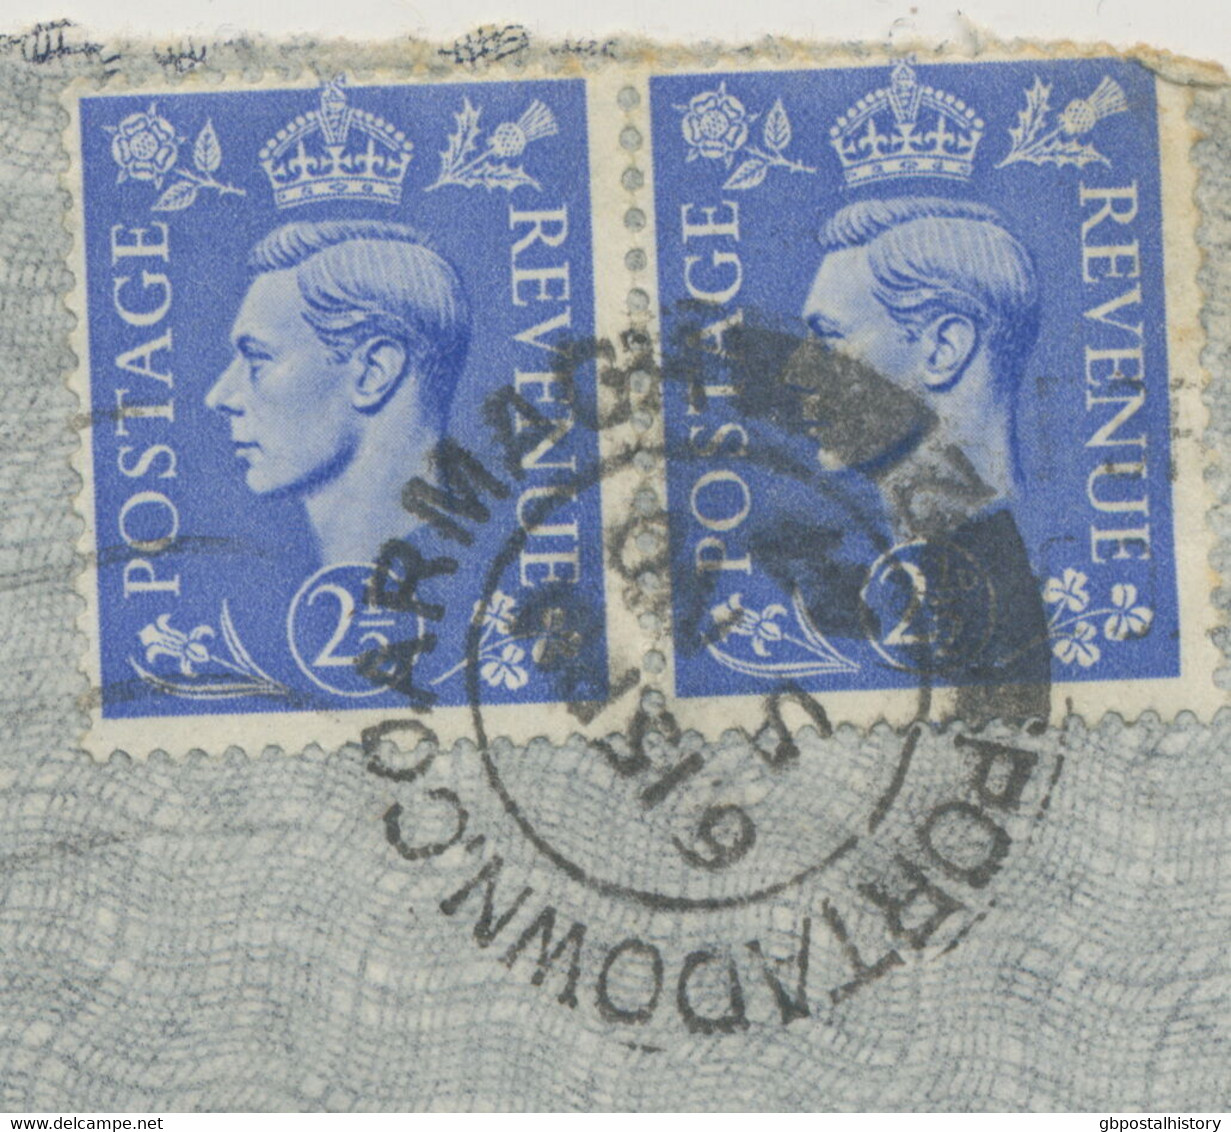 GB „PORTADOWN.CO.ARMAGH / 2“ Double Ring (25 Mm) Airmail Cover To Switzerland - Noord-Ierland